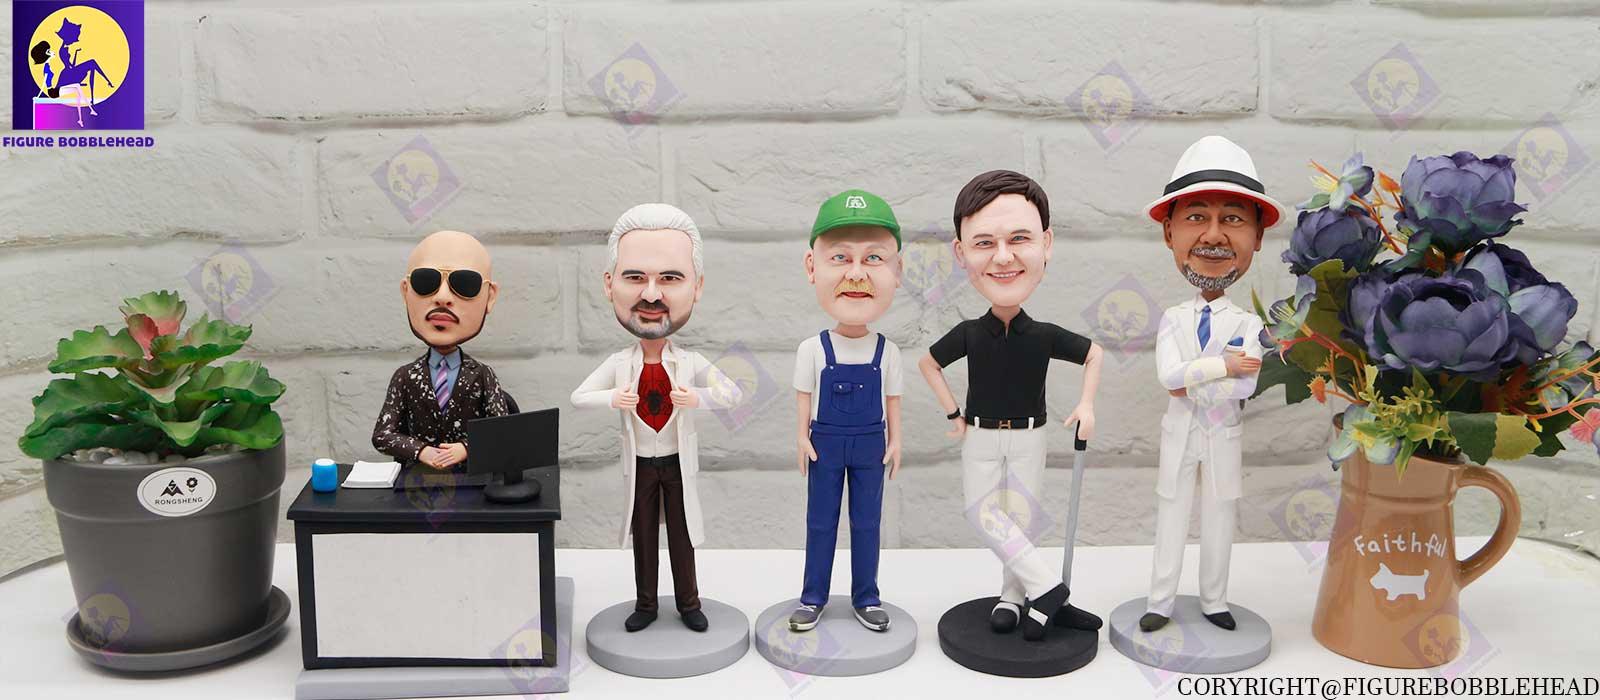 Custom Bobbleheads To Thanks Your Boss-- Best Gifts Ideas for 2021 Boss's Day - Figure Bobblehead